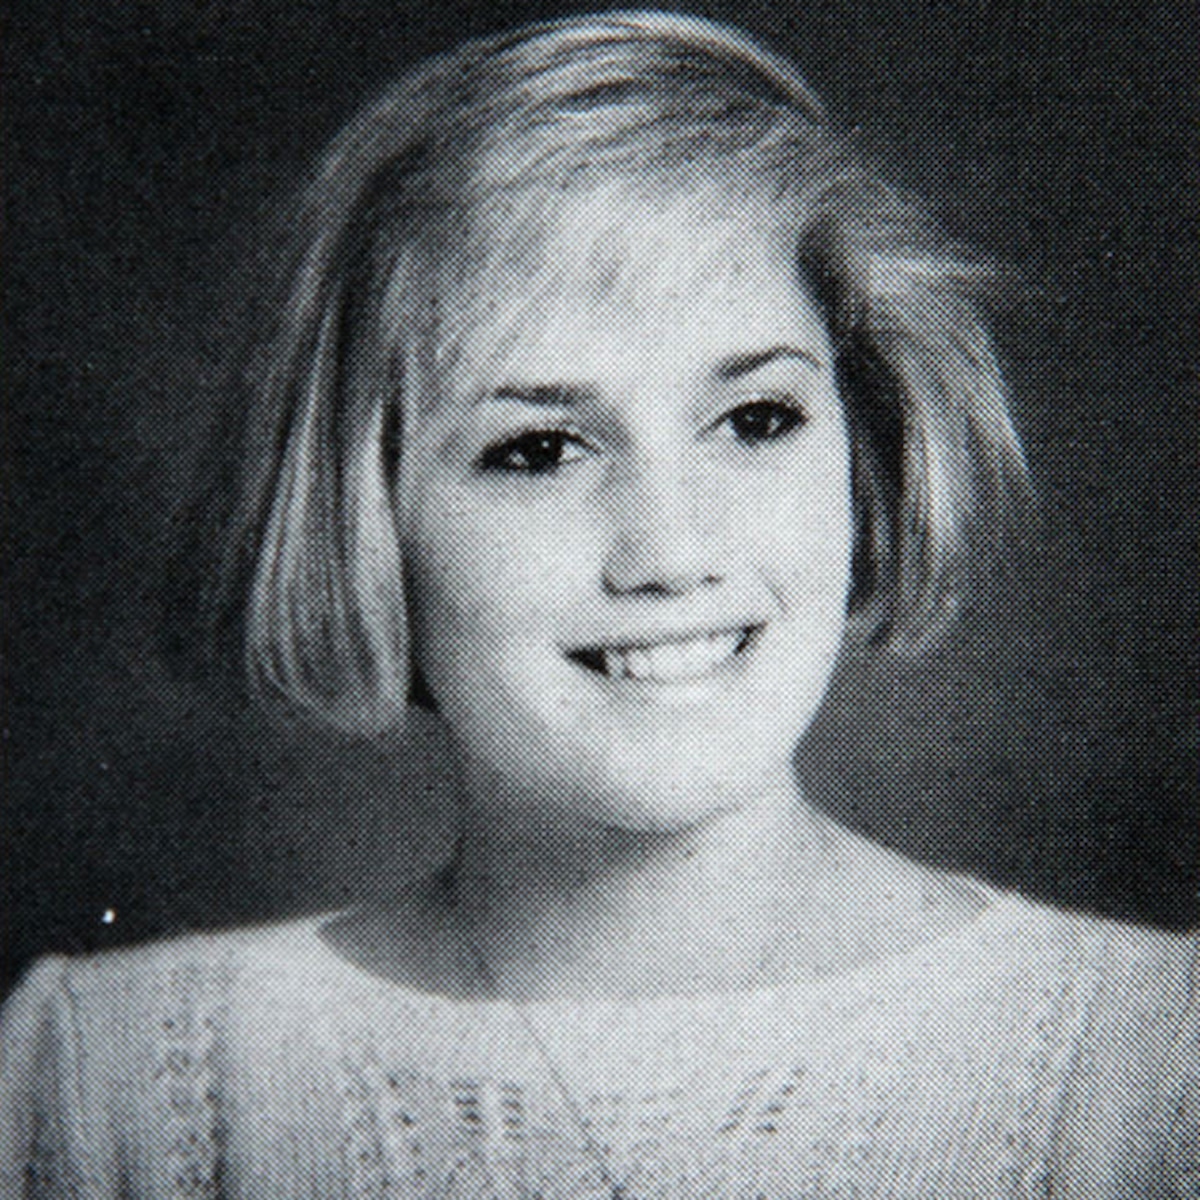 30 Celebrity Yearbook Photos You Have to See to Believe - E! Online